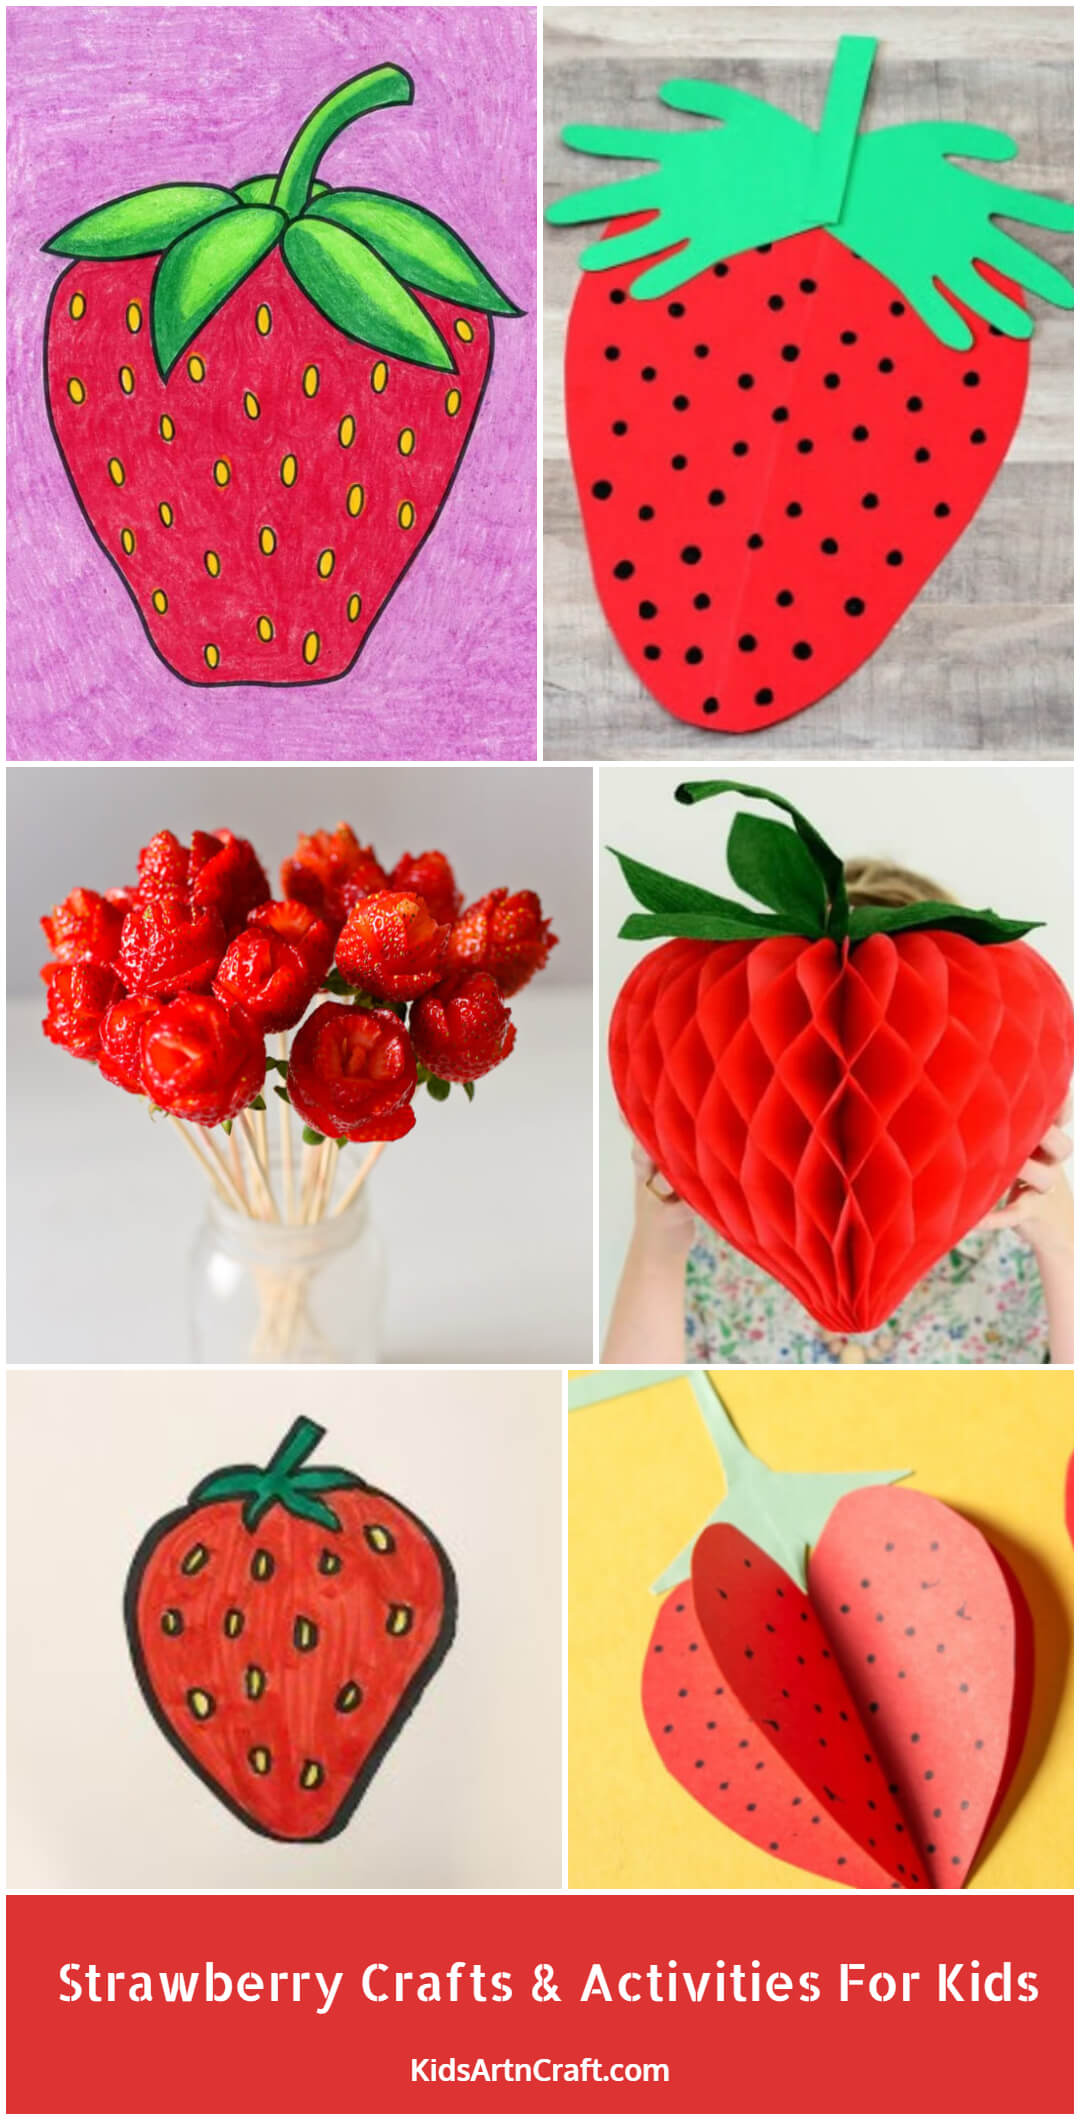 Strawberry Crafts & Activities For Kids